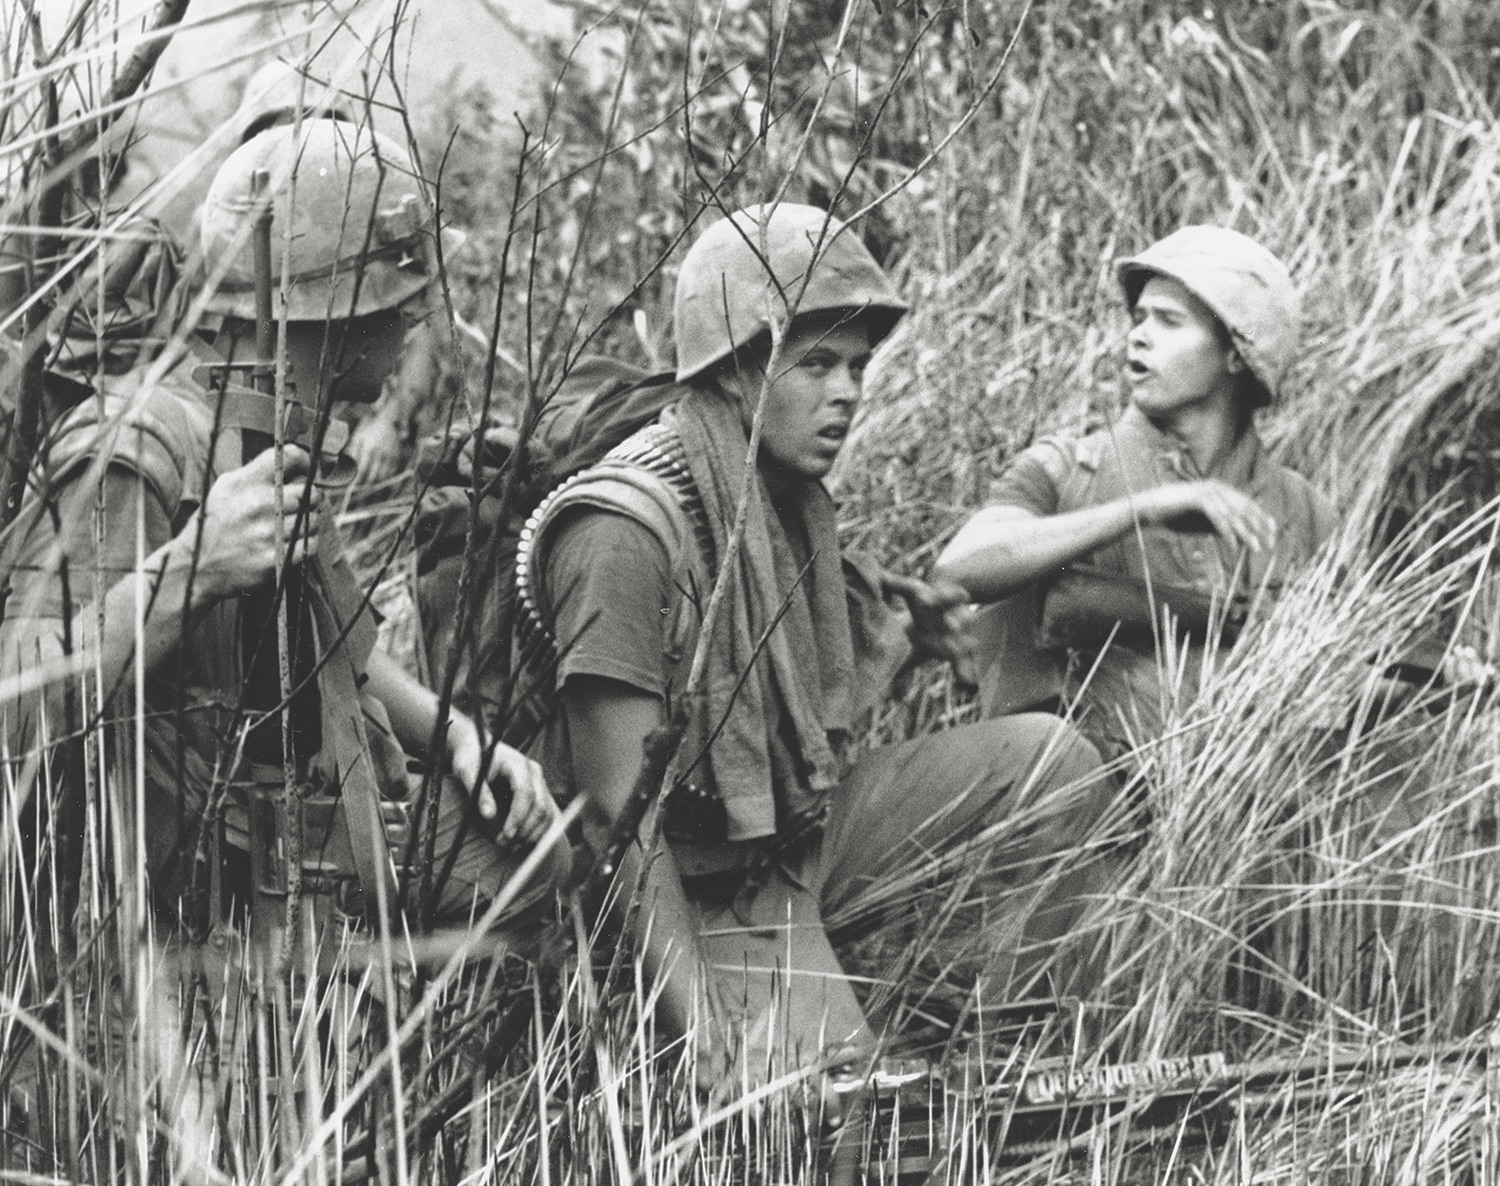 Near the DMZ on July 17, 1968, troops of Company E., 2nd Battalion, 3rd Marine Regiment, 3rd Marine Division, maneuver into position outside their landing zone. (USMC)